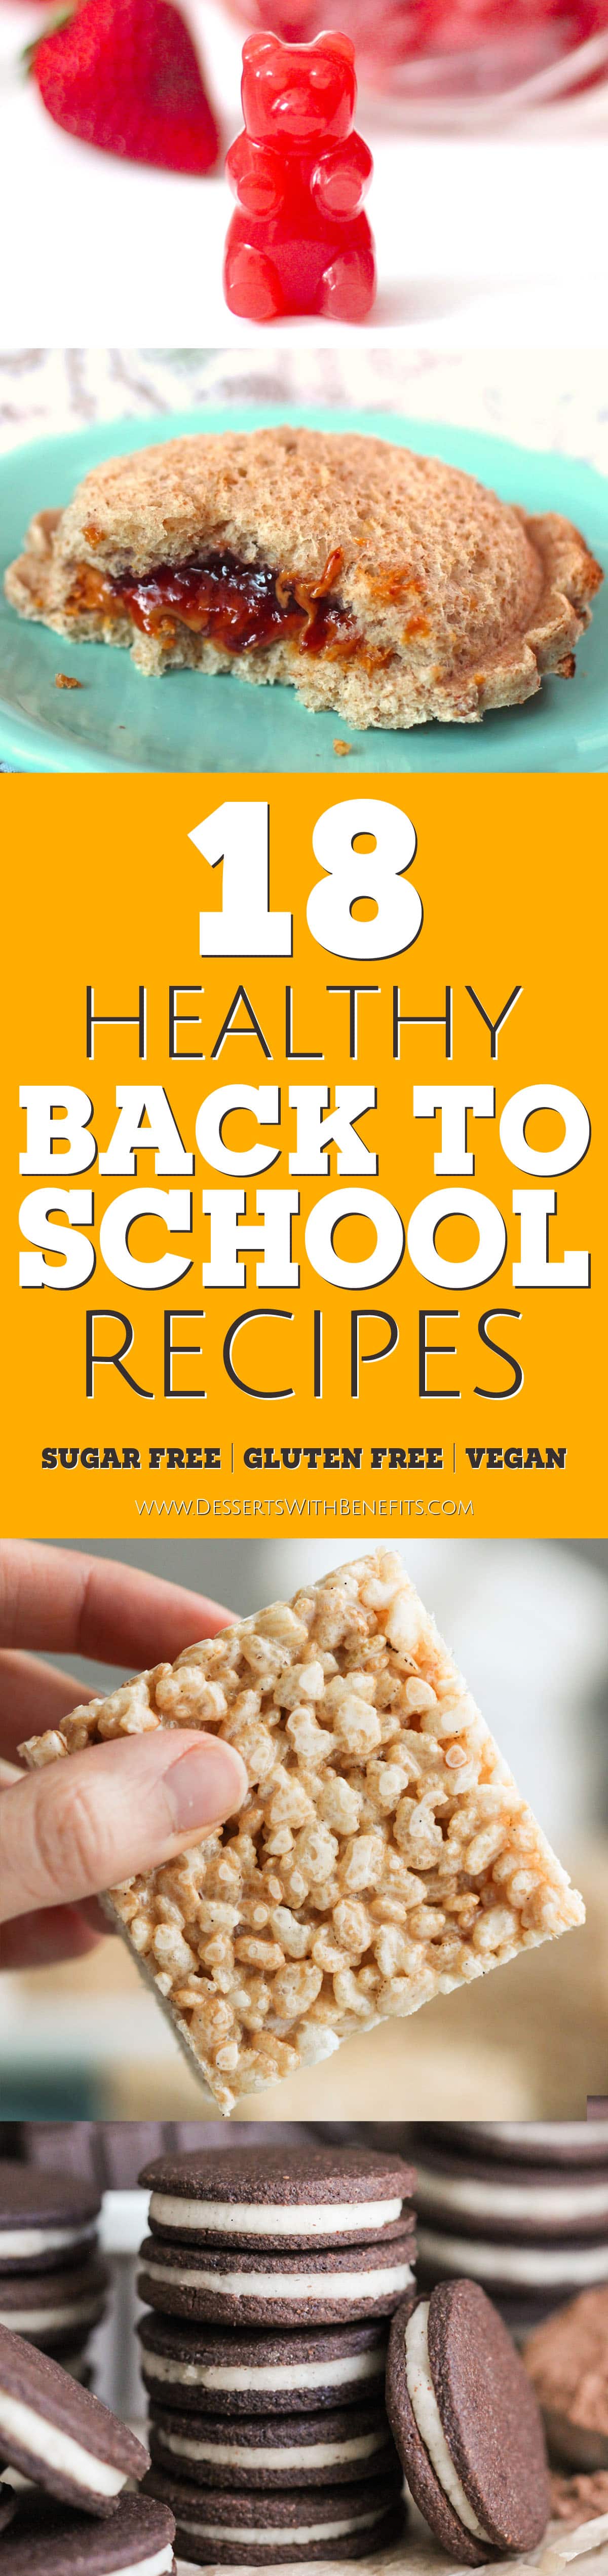 18 Healthy Back To School Recipes Roundup